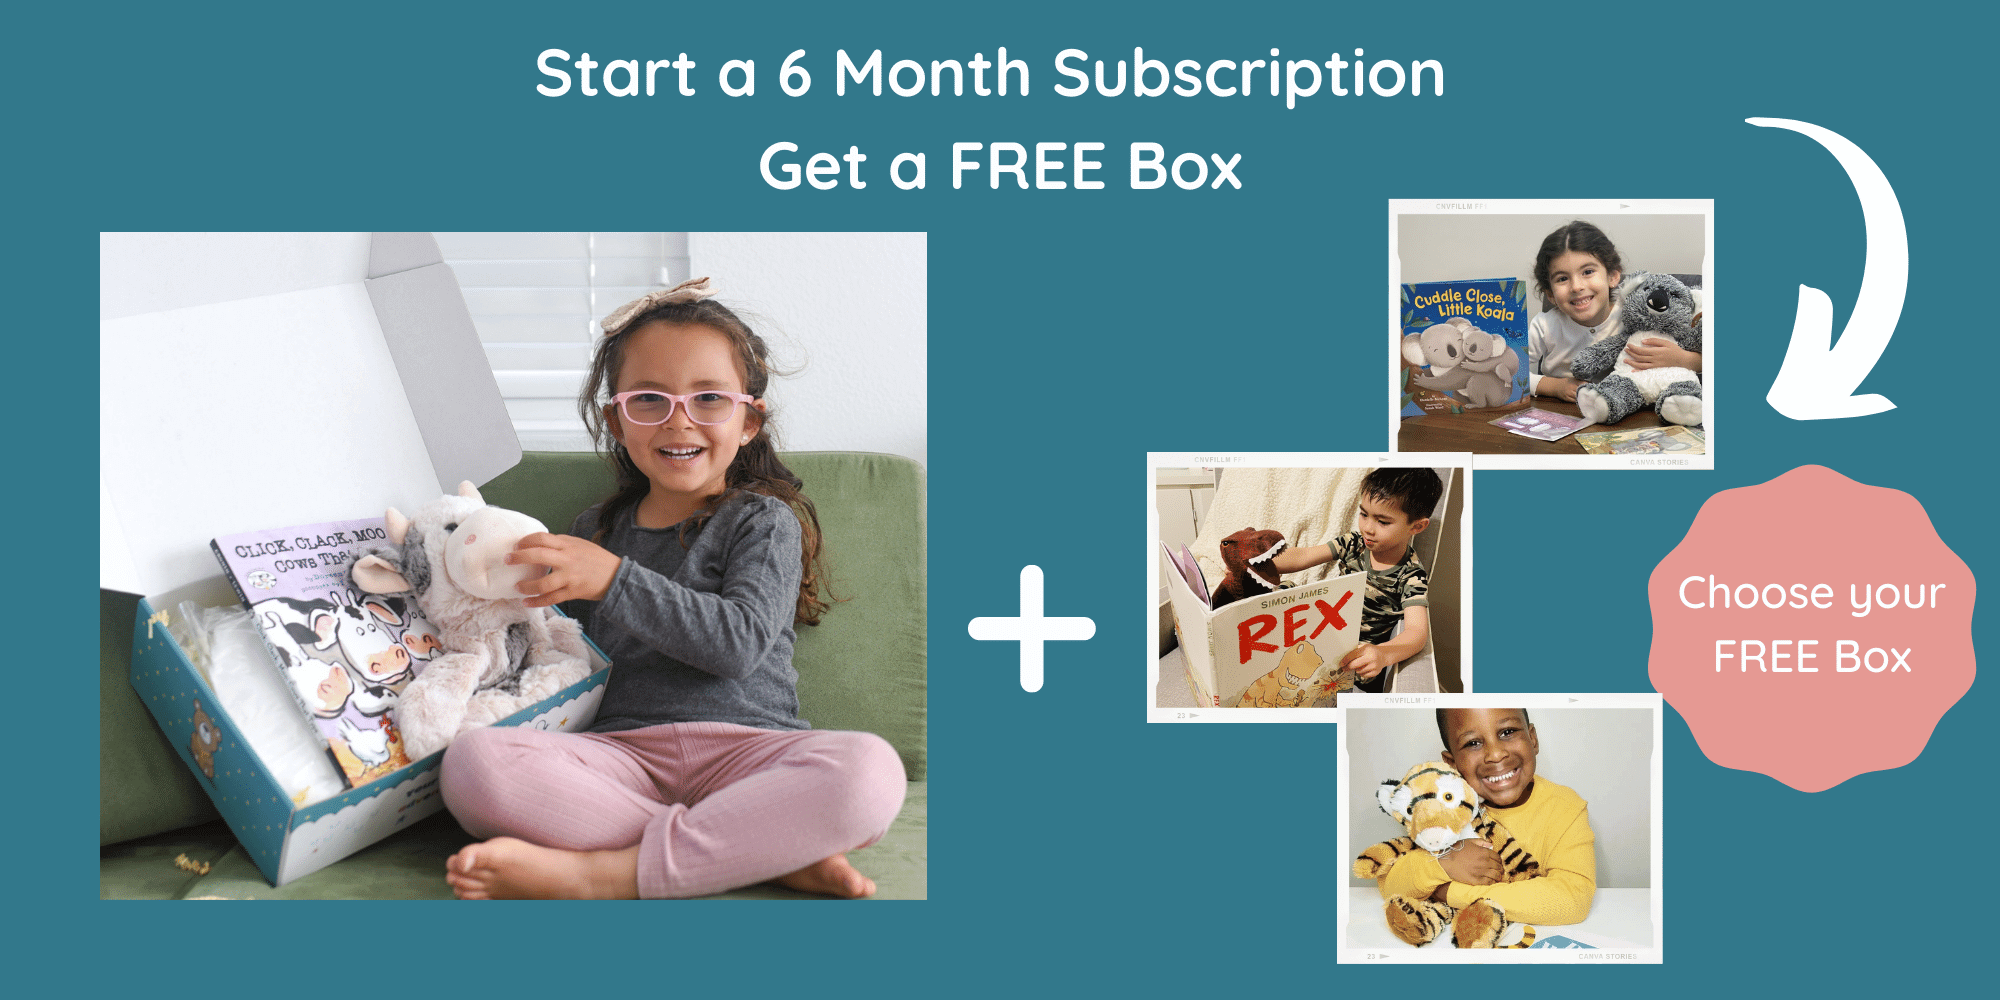 949-start-a-6-month-subscription-and-get-a-free-box-2000-×-1000-px-7-1-16510032657328.png